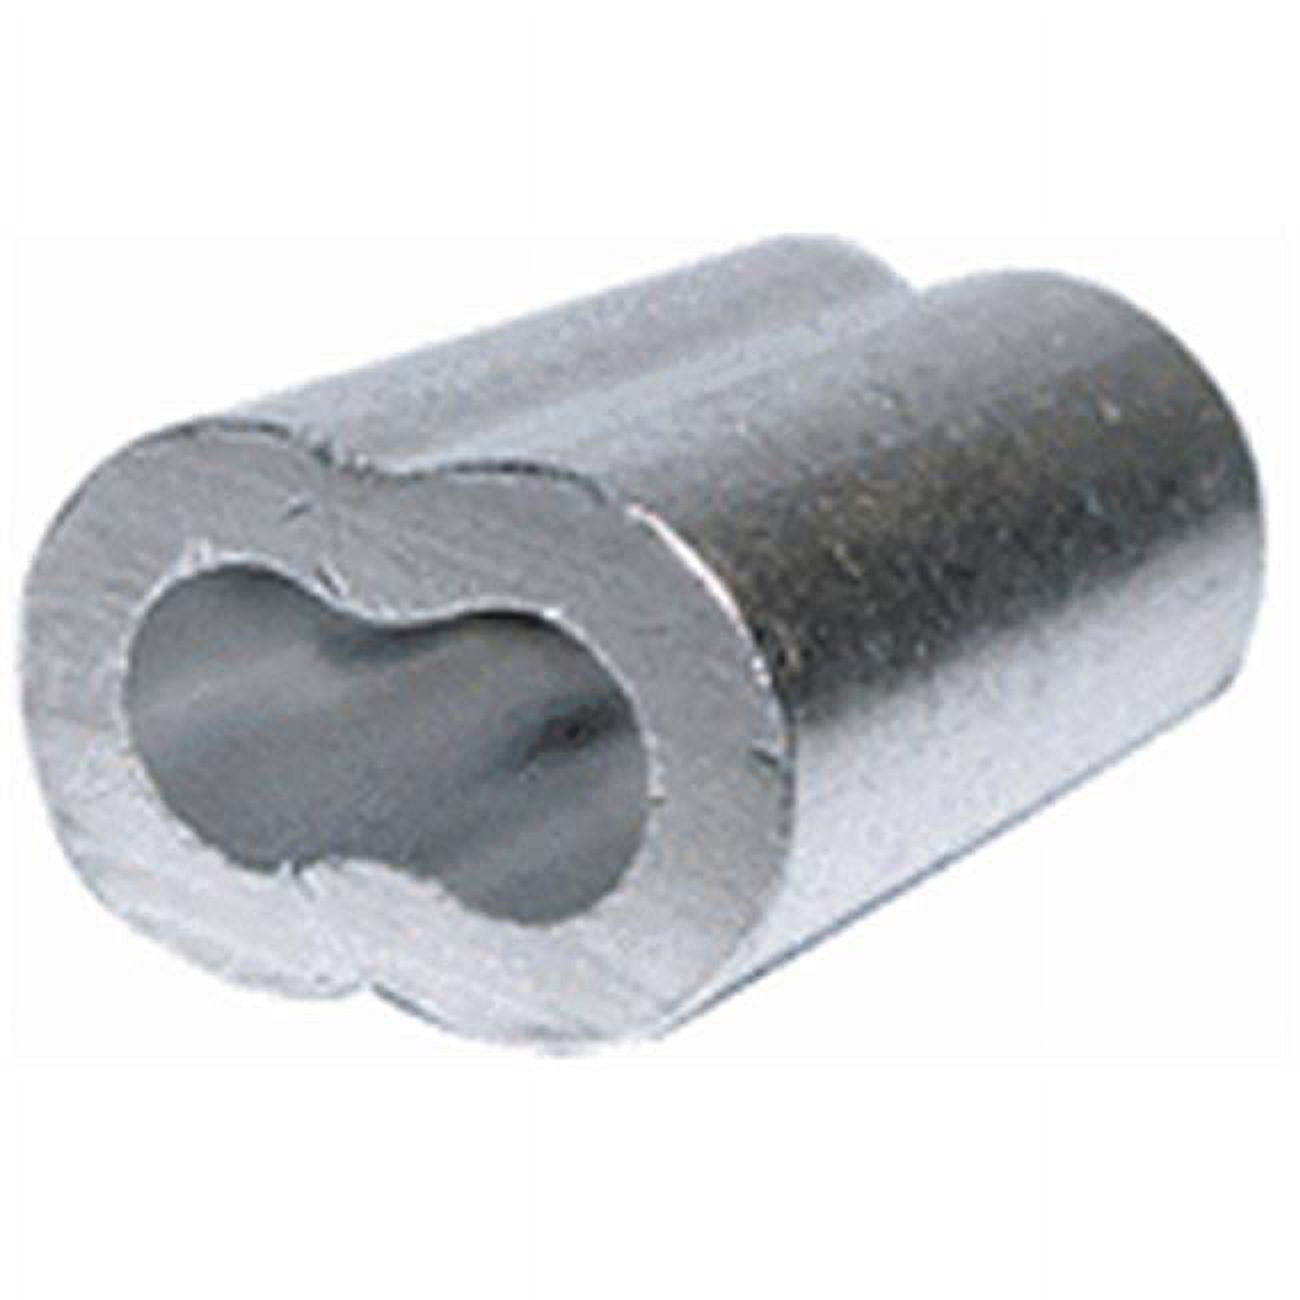 7670804 0.06 In. Aluminum Cable Ferrule - Pack Of 50